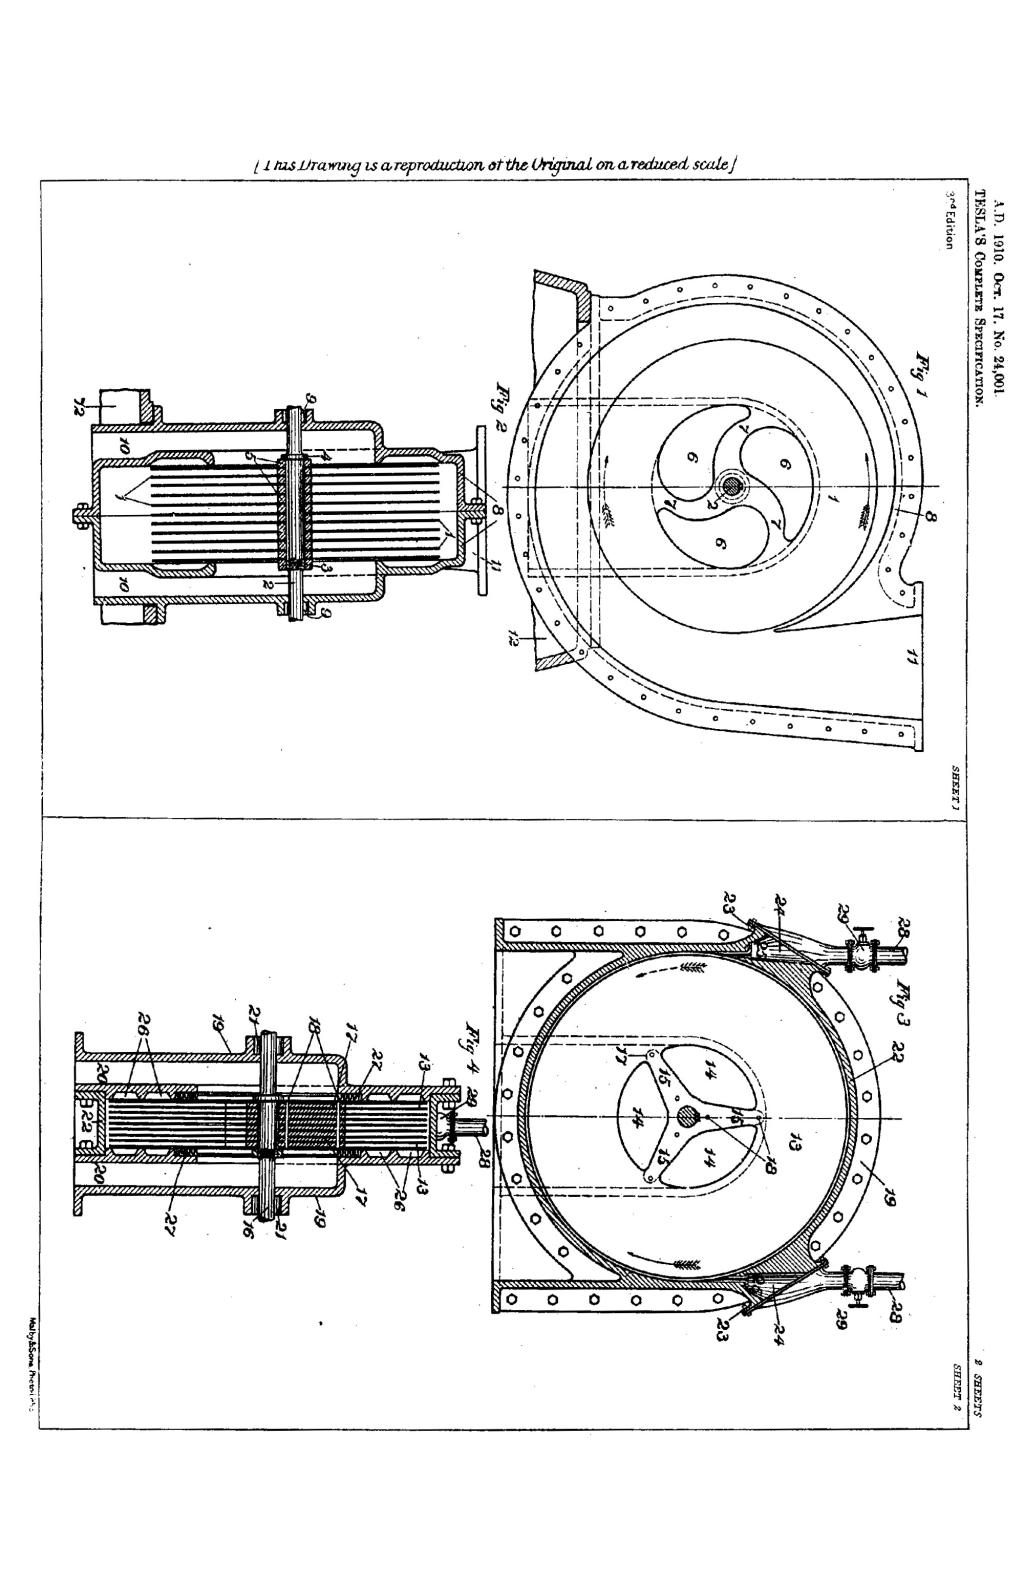 Nikola Tesla British Patent 24,001 - Improved Method of Imparting Energy to or Deriving Energy from a Fluid and Apparatus for Use Therein - Image 1